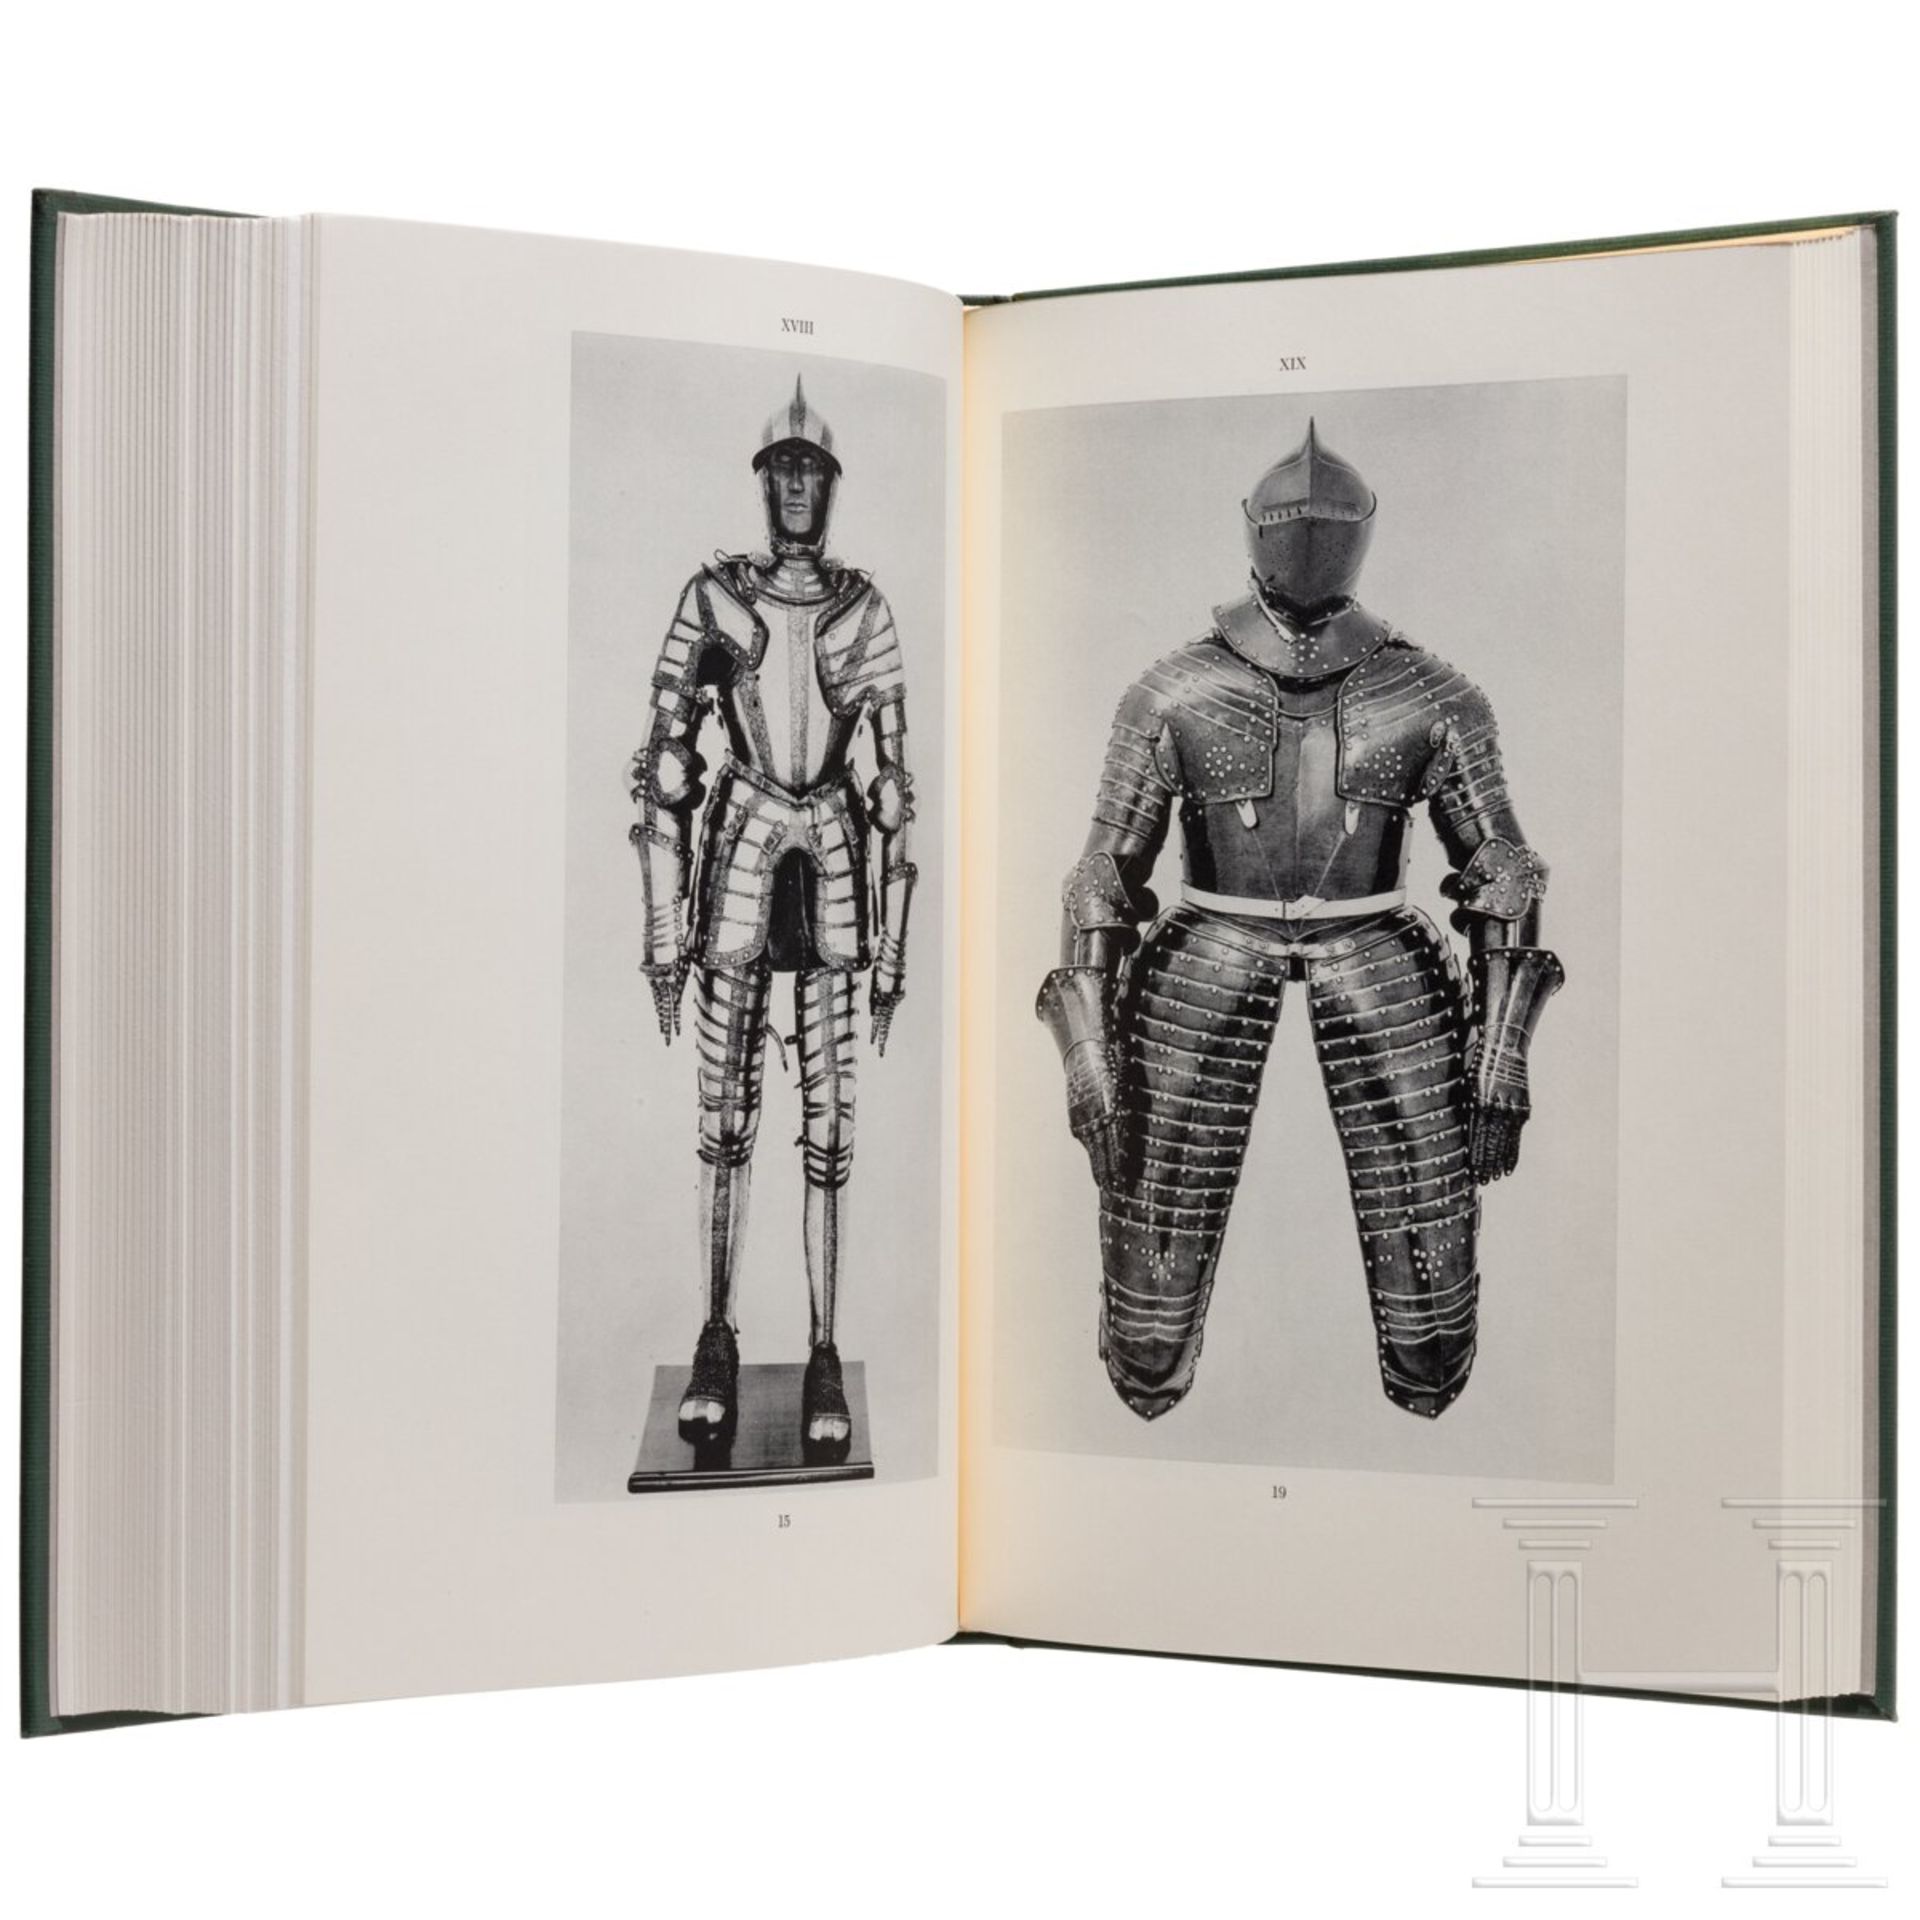 The Kretzschmar von Kienbusch Collection of Armor and Arms, Princeton University Library, 1963 - Image 3 of 4